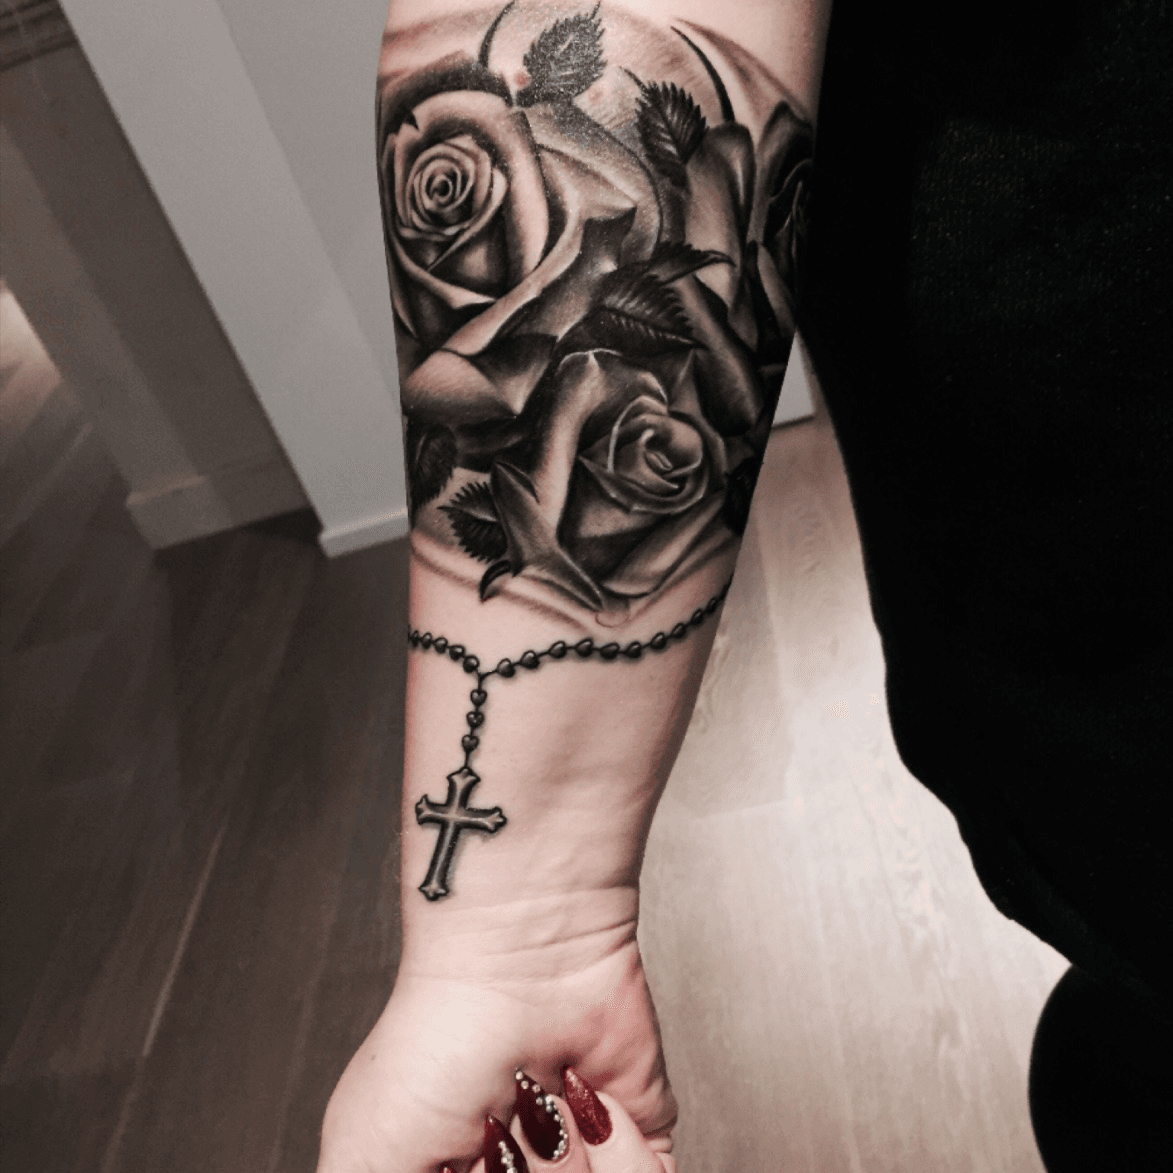 NYHC Tattoo on Twitter Rose and rosary handjob by Sweety Follow  sweetytattoo to see more of his work New York  httpstcoeFwMwXgjFh  httpstcoa5FF0afK42  Twitter